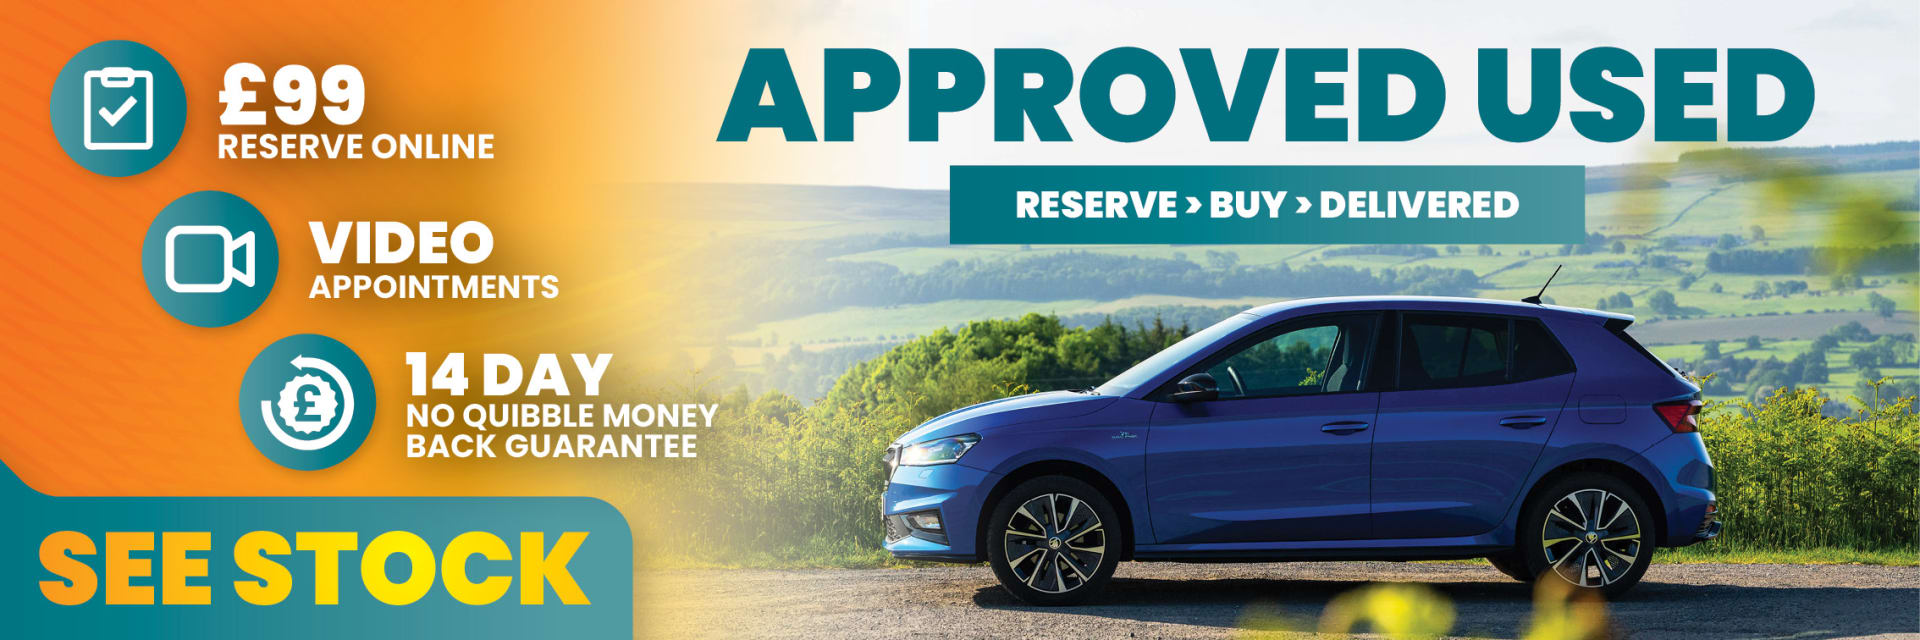 Skoda Approved Used Vehicles 